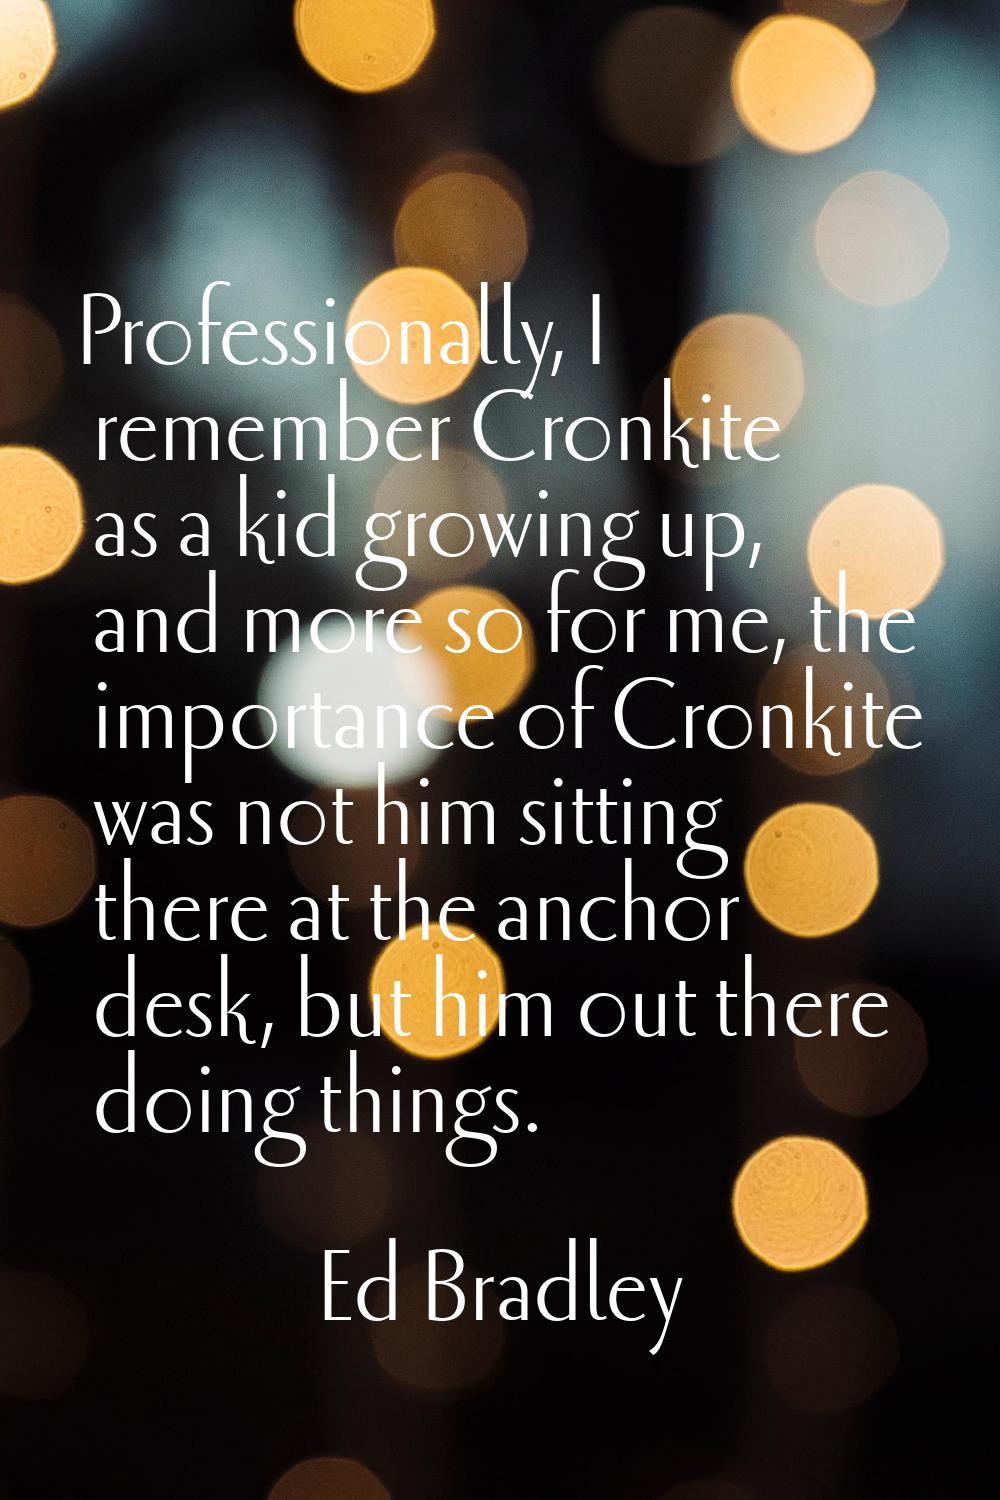 Professionally, I remember Cronkite as a kid growing up, and more so for me, the importance of Cron